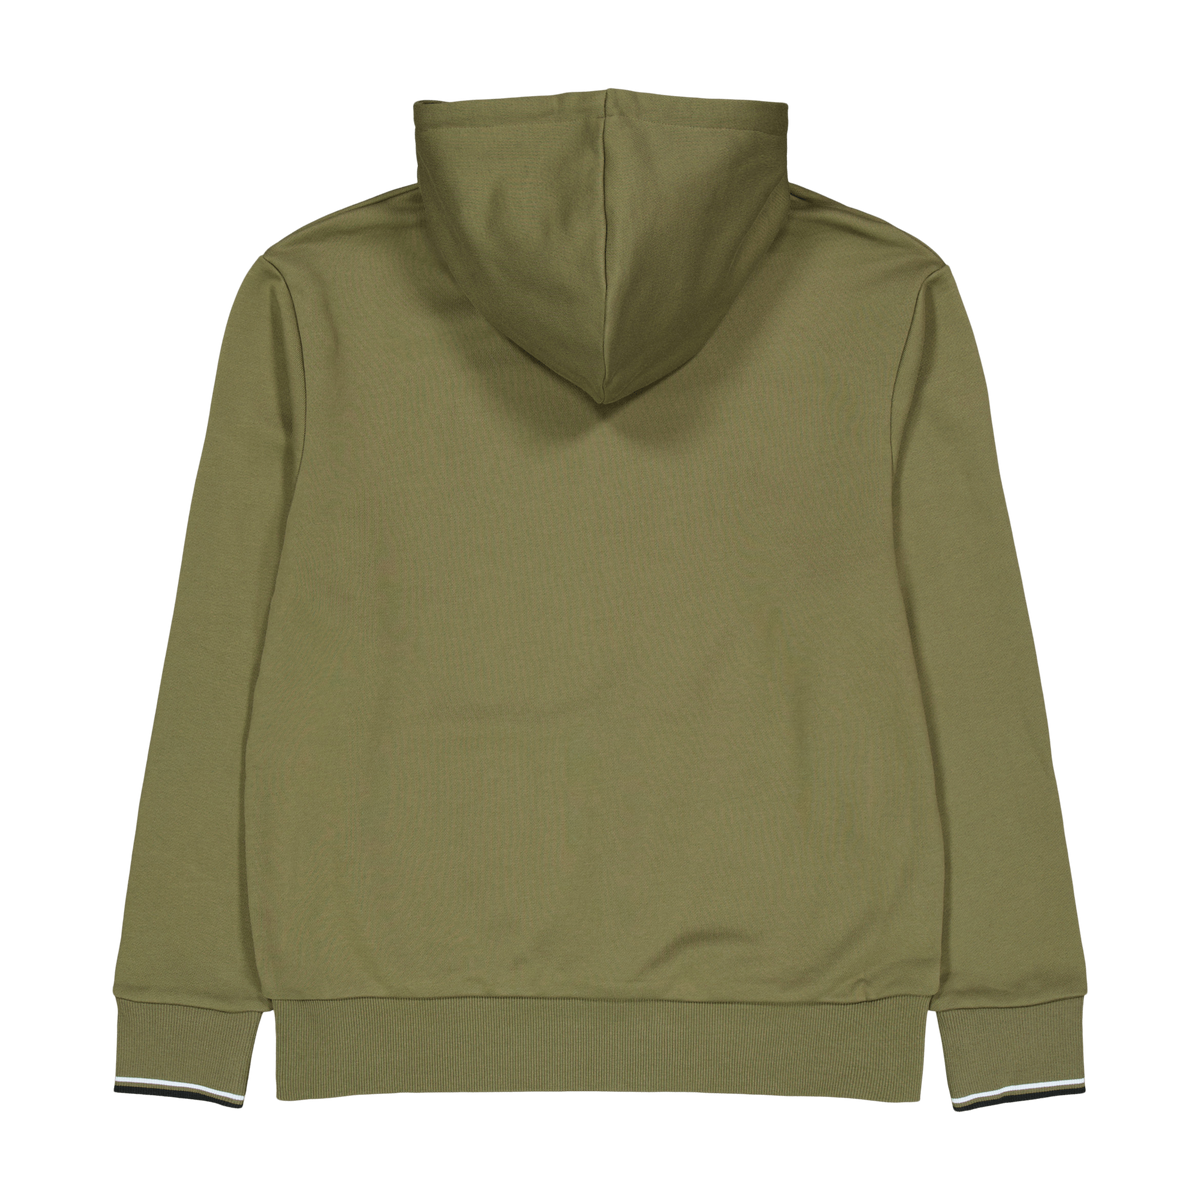 Fred Perry Tipped Hooded Sweatsh Q55